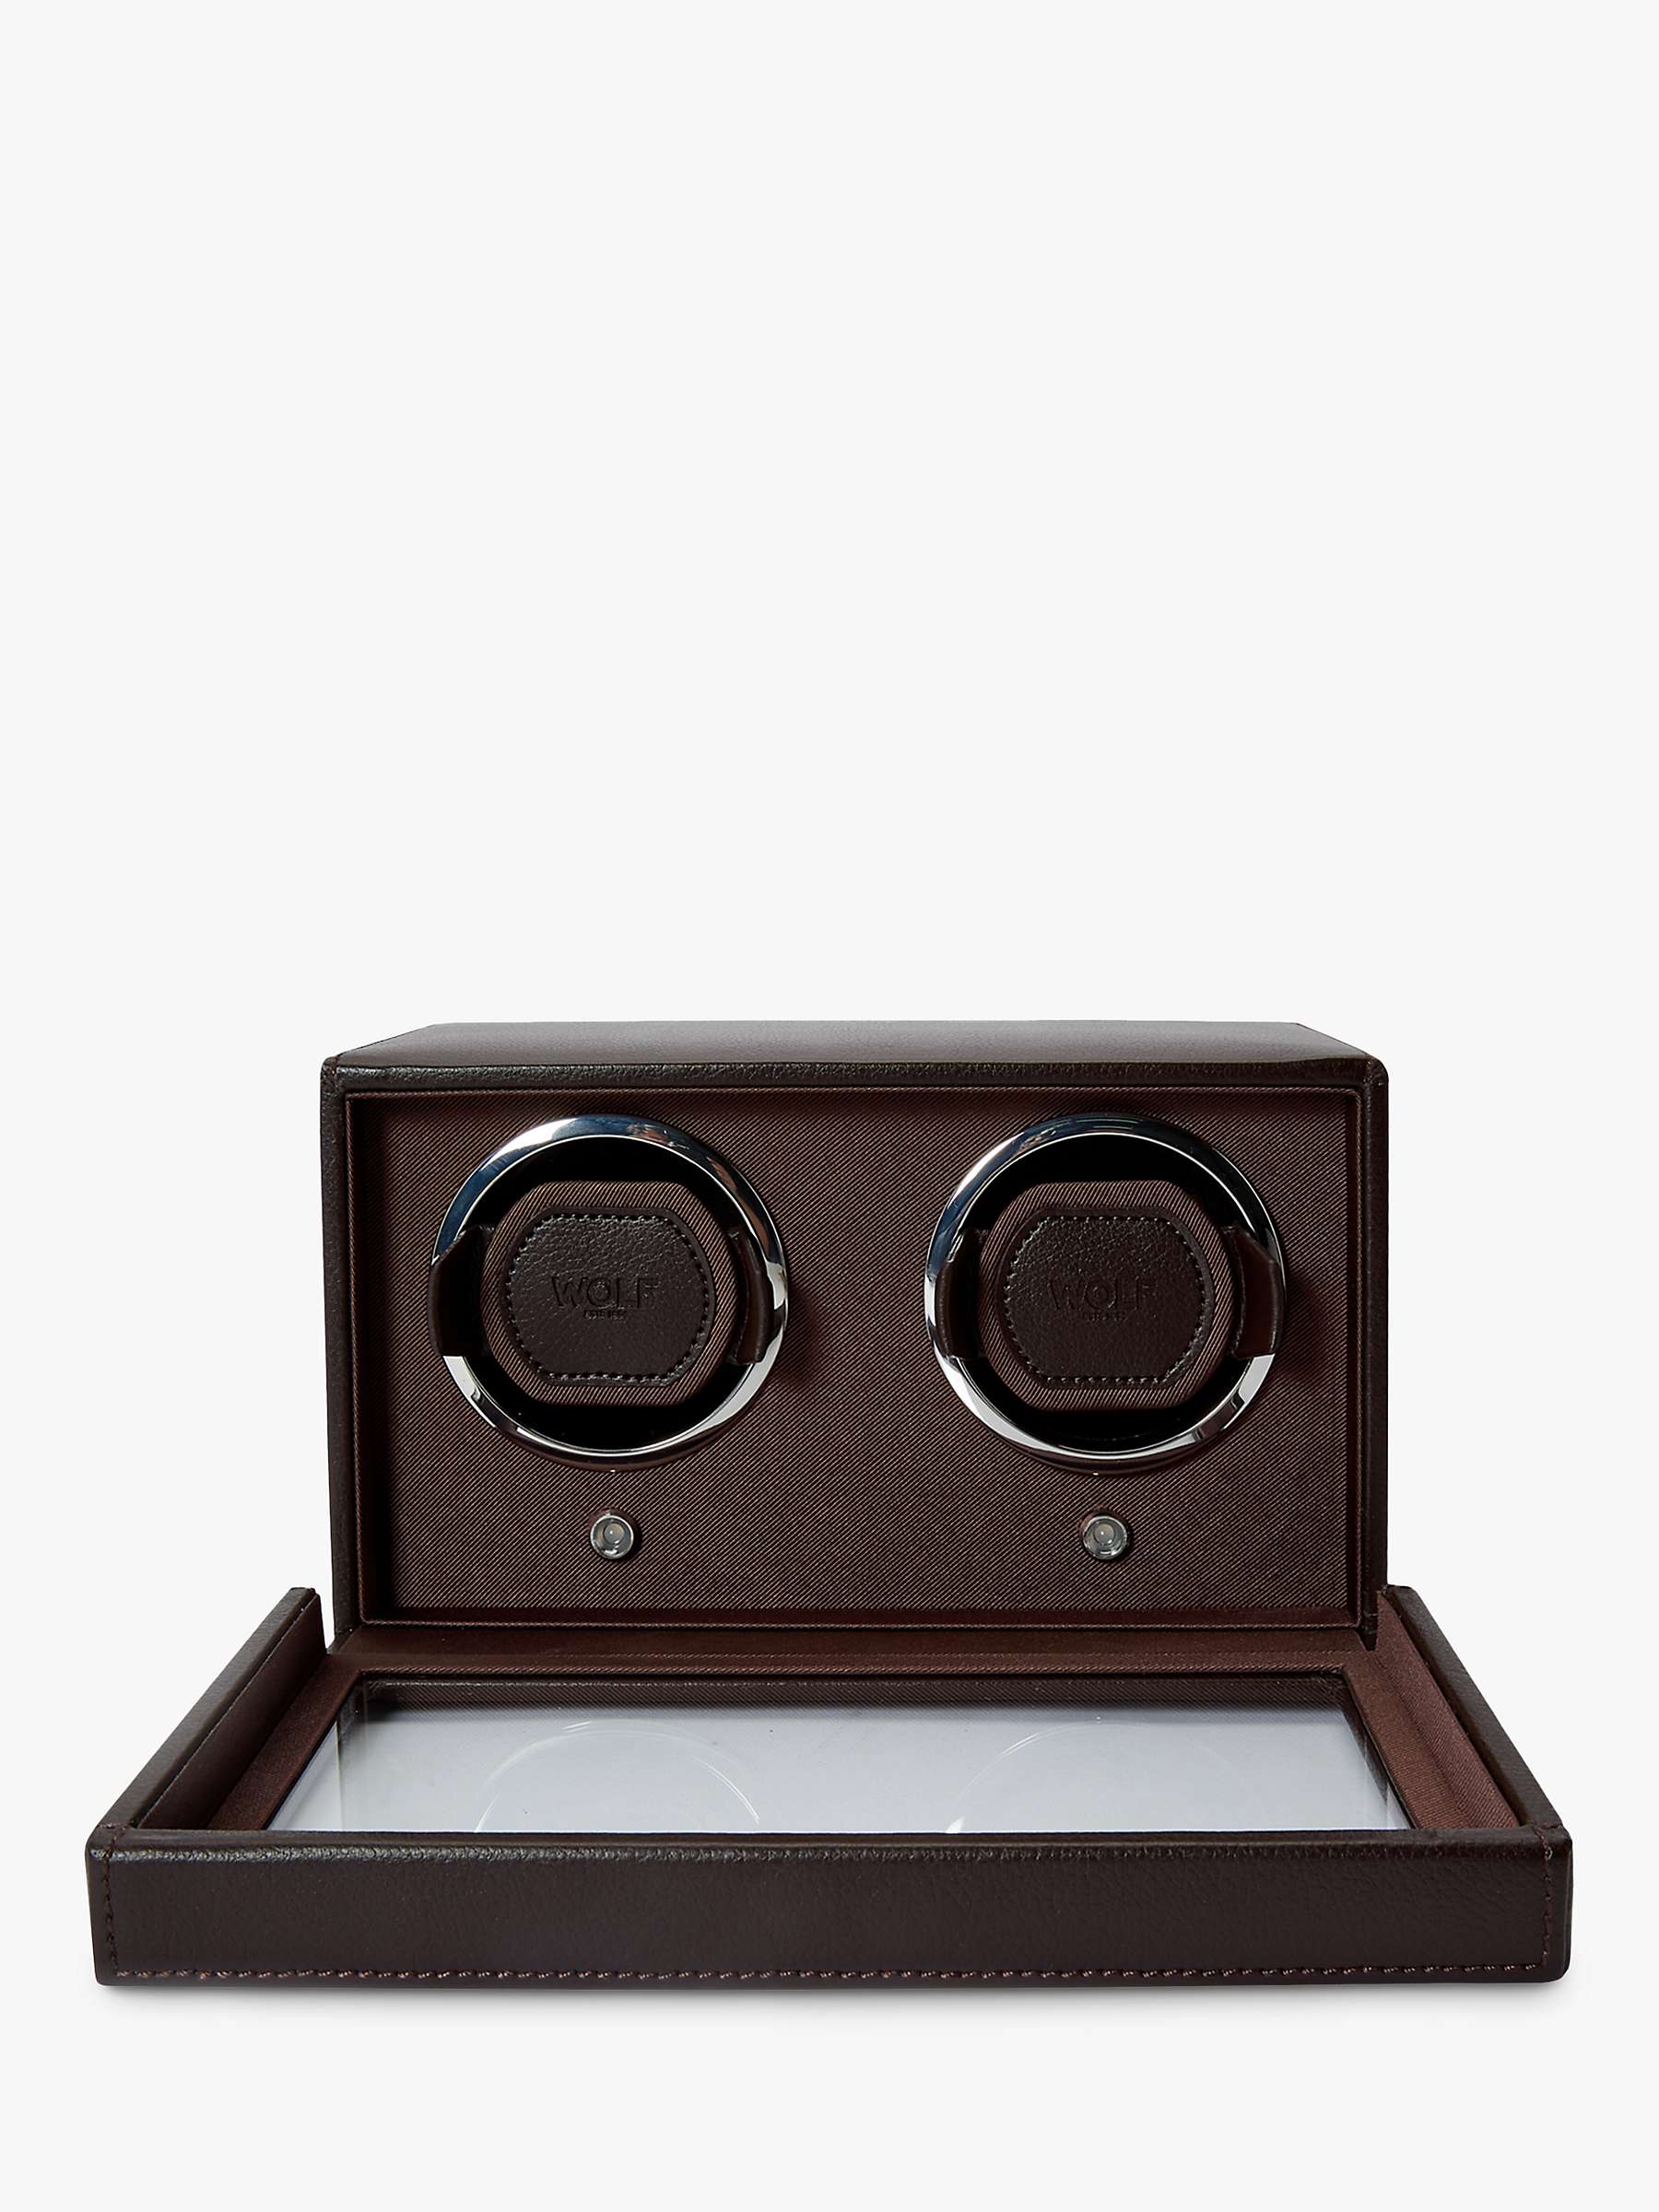 Buy Wolf Cub Double Vegan Leather Watch Winder Online at johnlewis.com